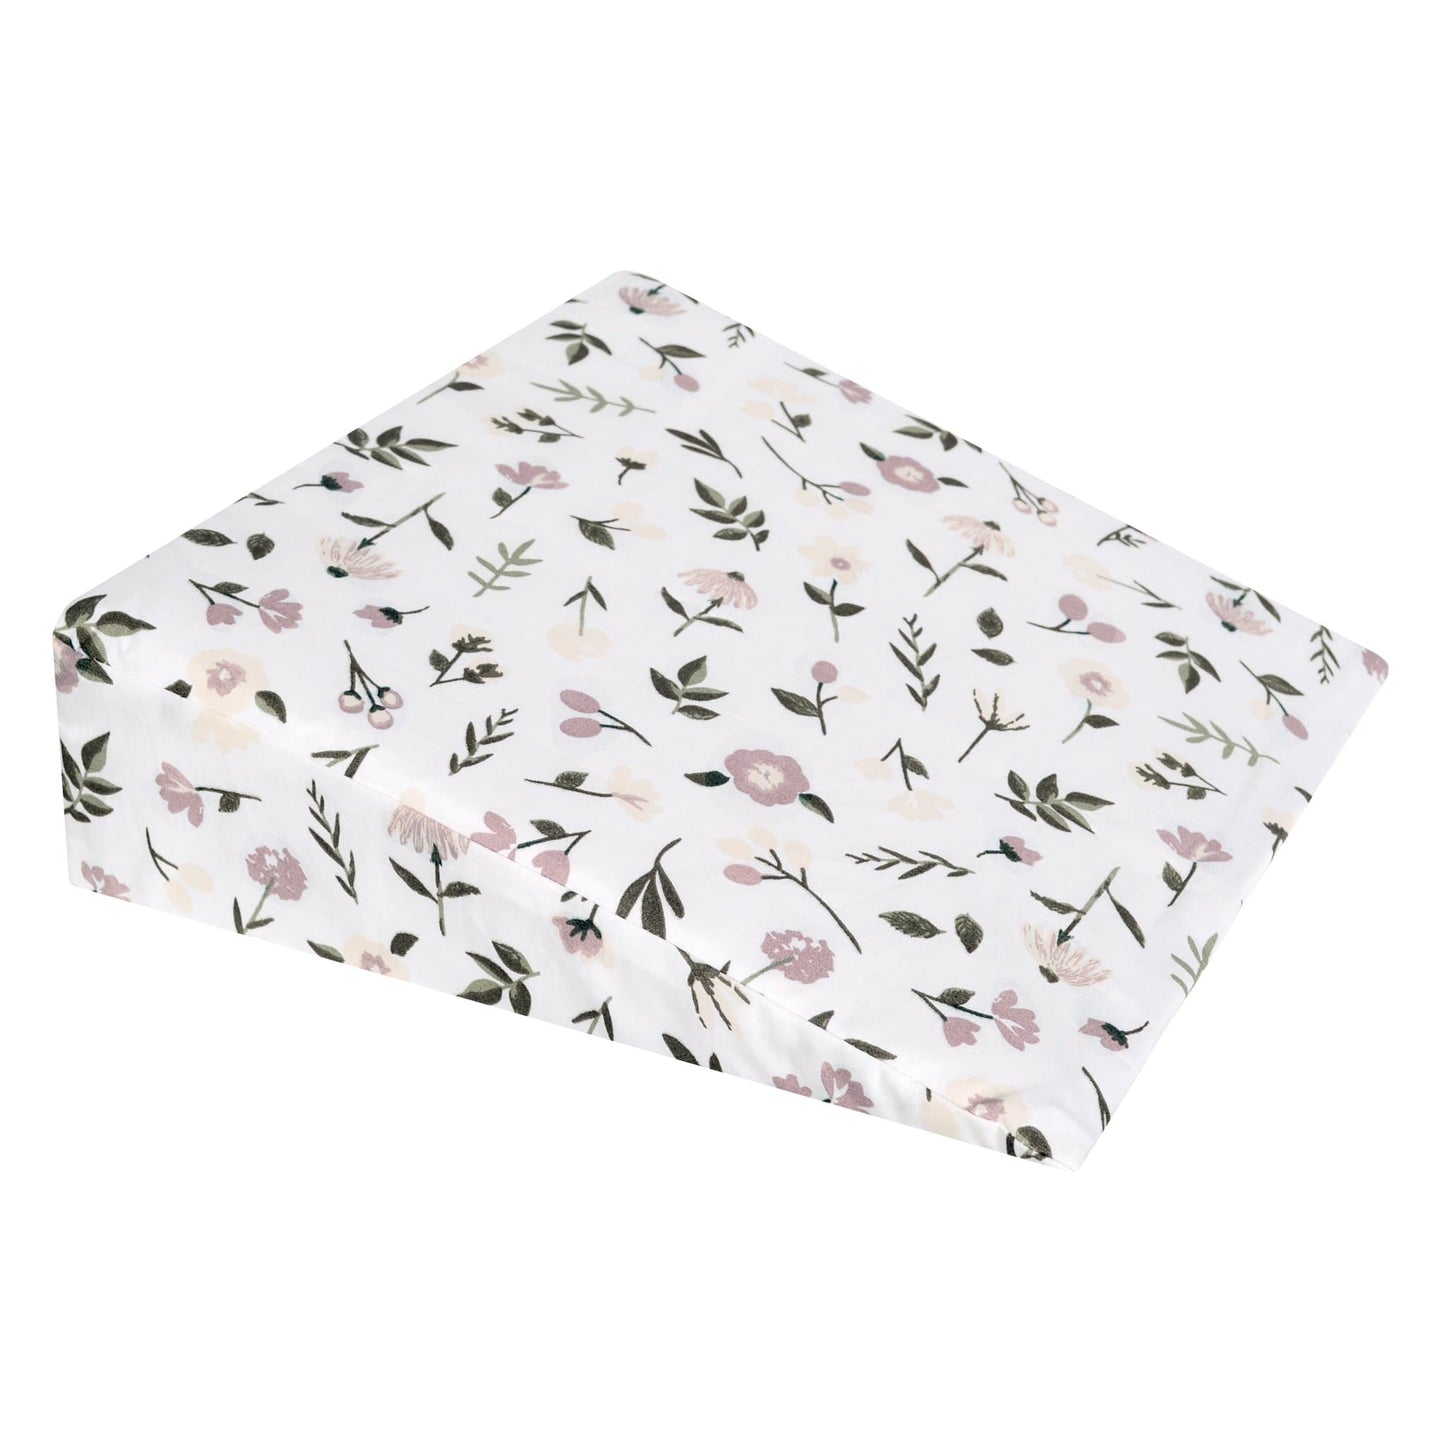 Wedge pillow - floral